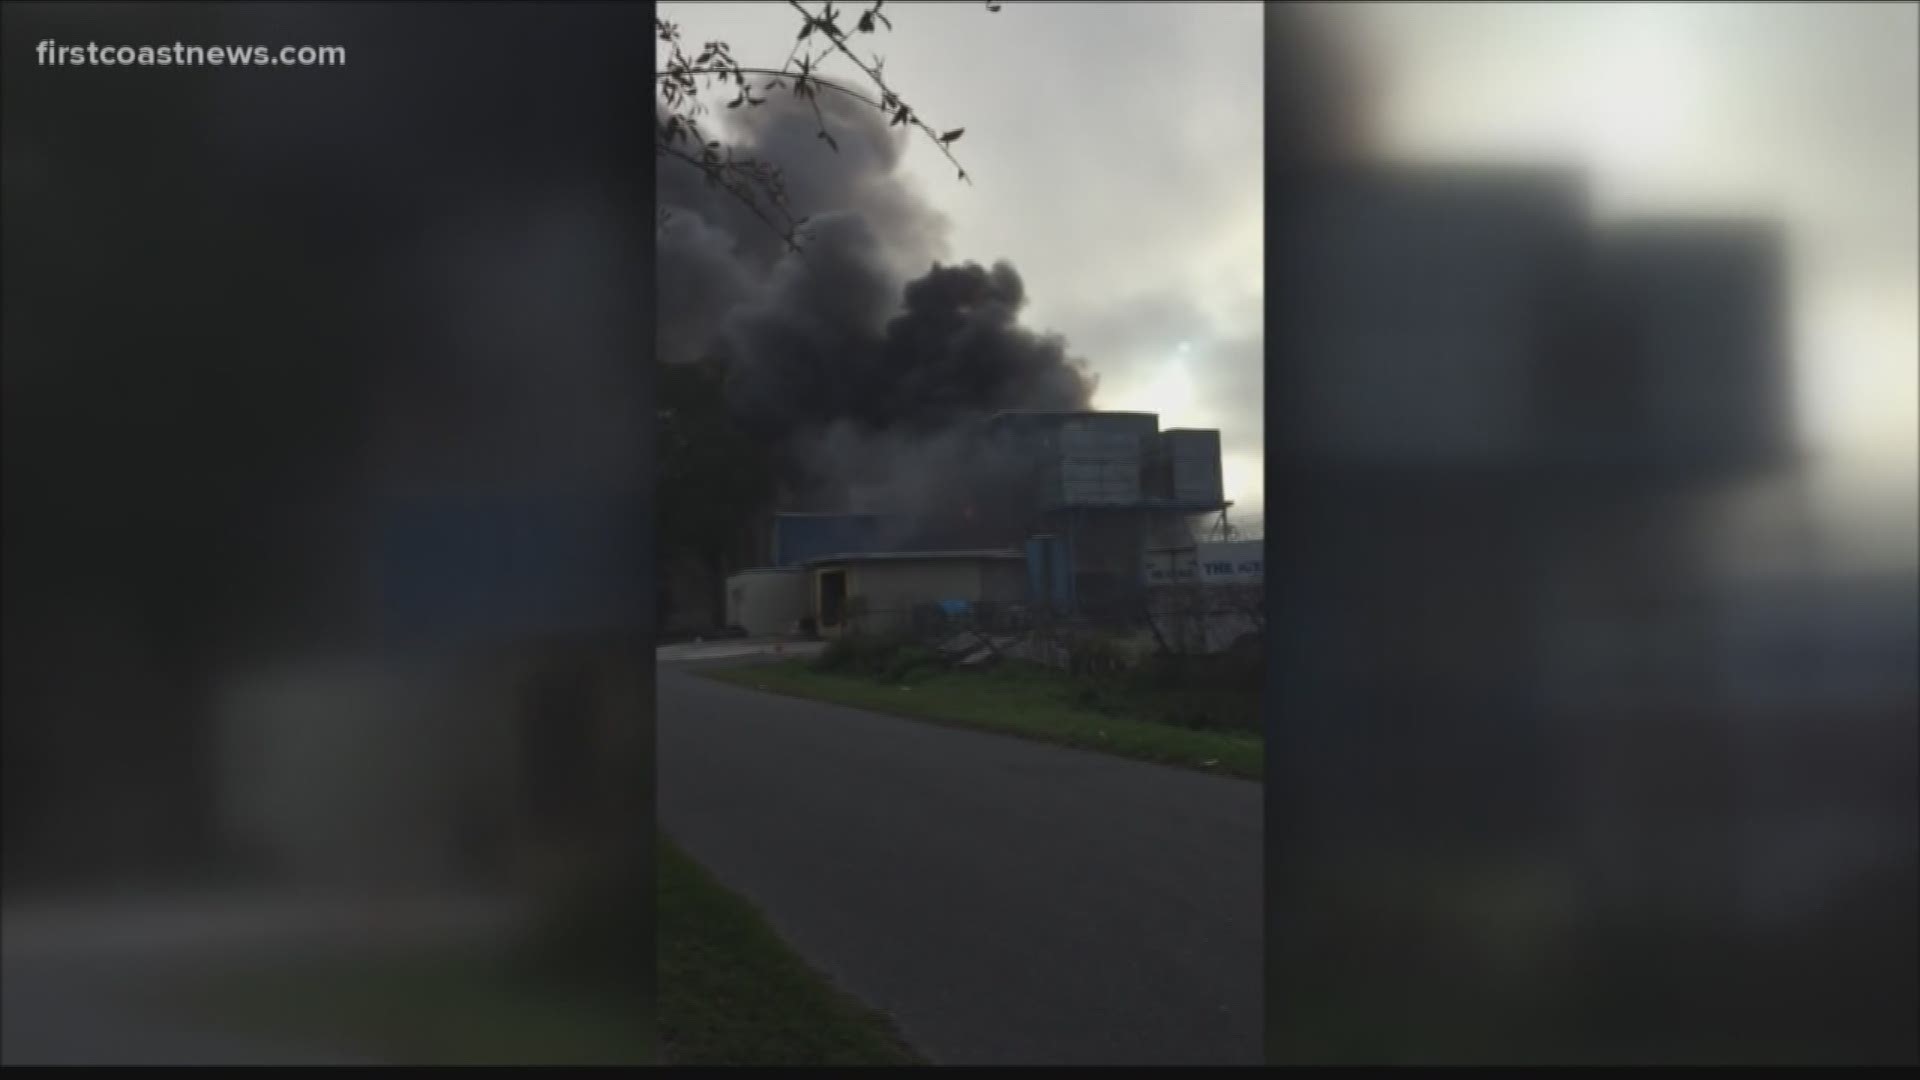 No injuries were reported in the fire which started around 8:30 a.m., according to the Jacksonville Fire and Rescue Department.